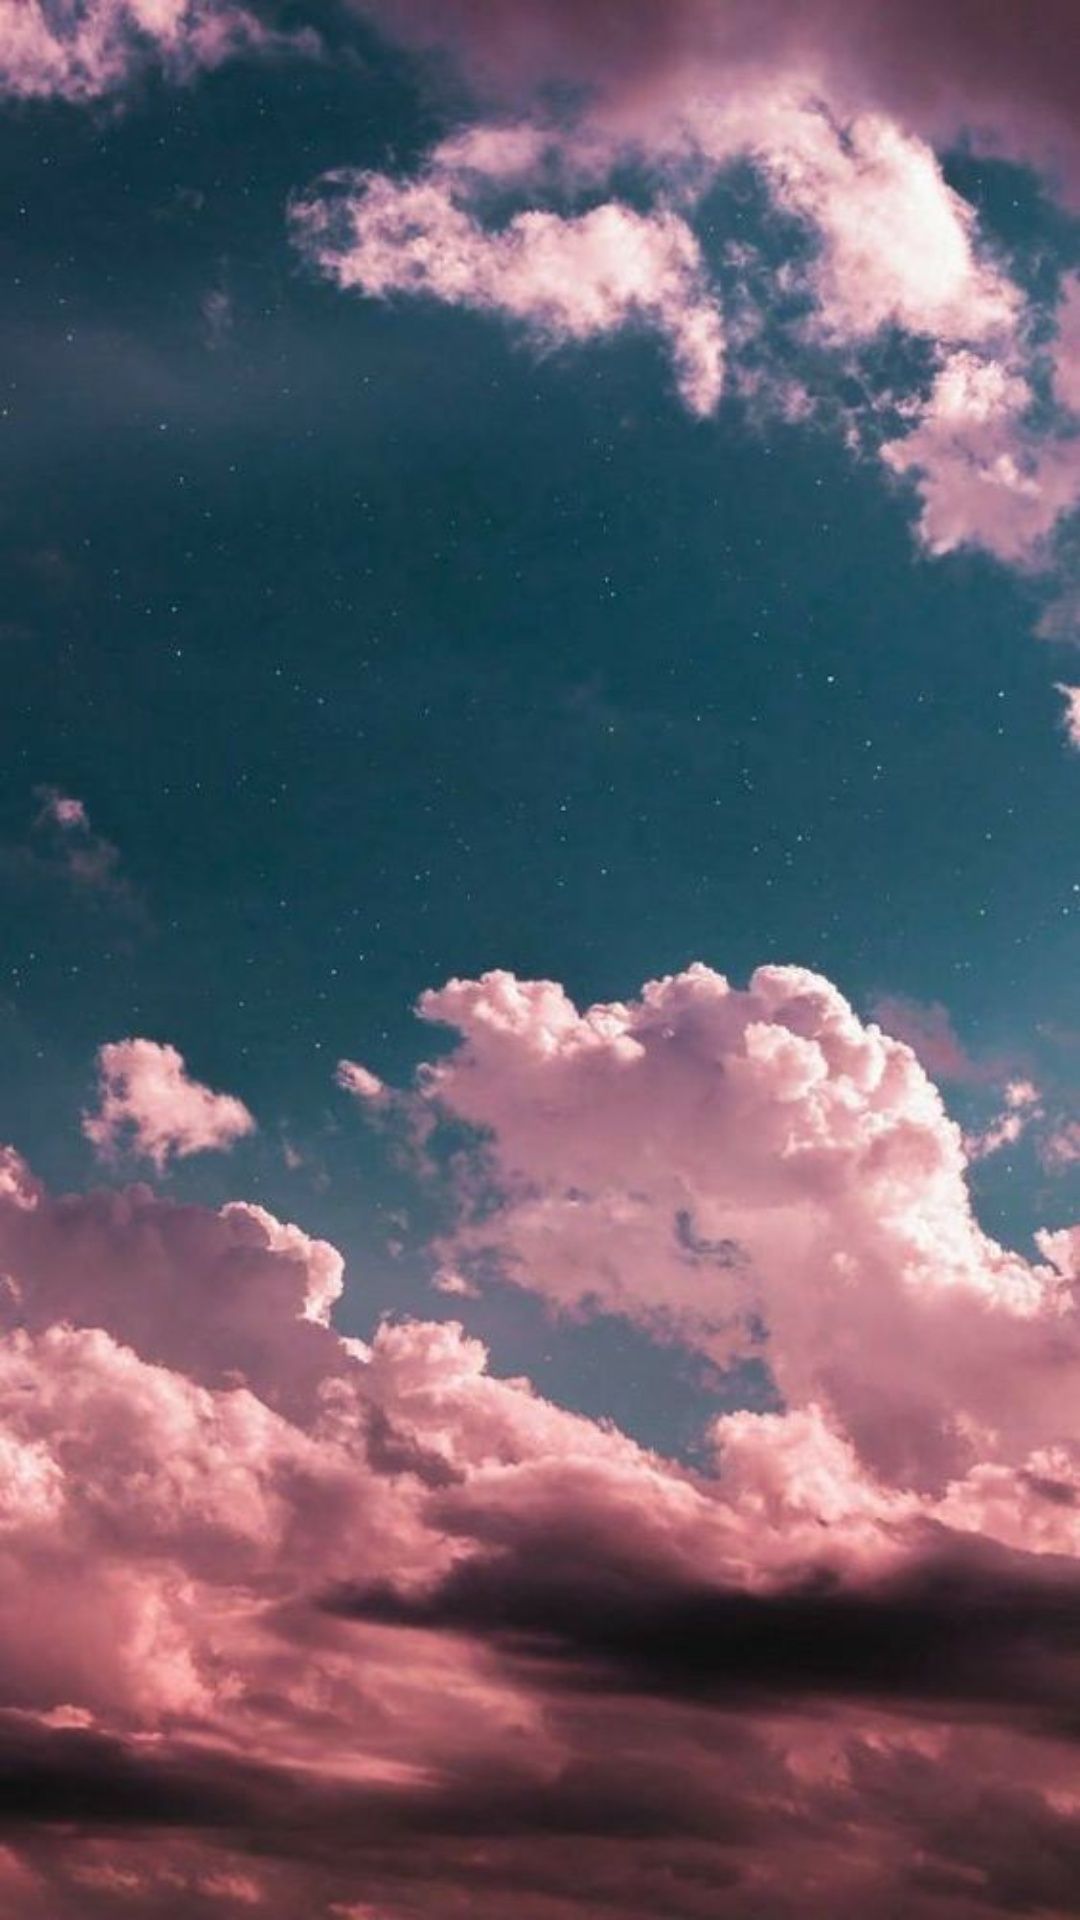 Aesthetic Clouds Wallpaper Aesthetic Clouds Wallpaper Download